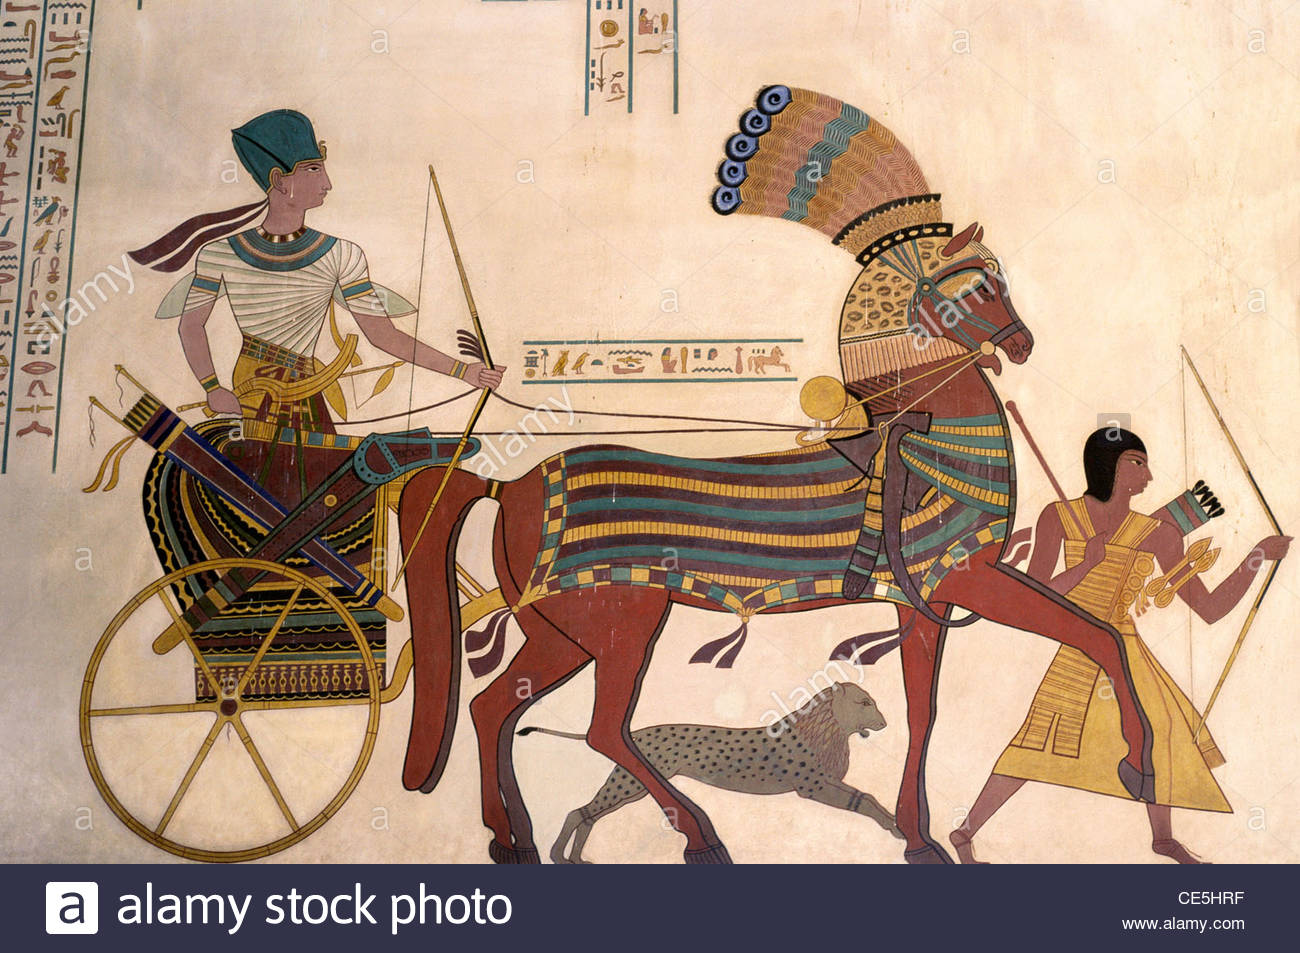 rameses-iii-returning-from-triumphant-campaign-against-africans-albert-CE5HRF.jpg